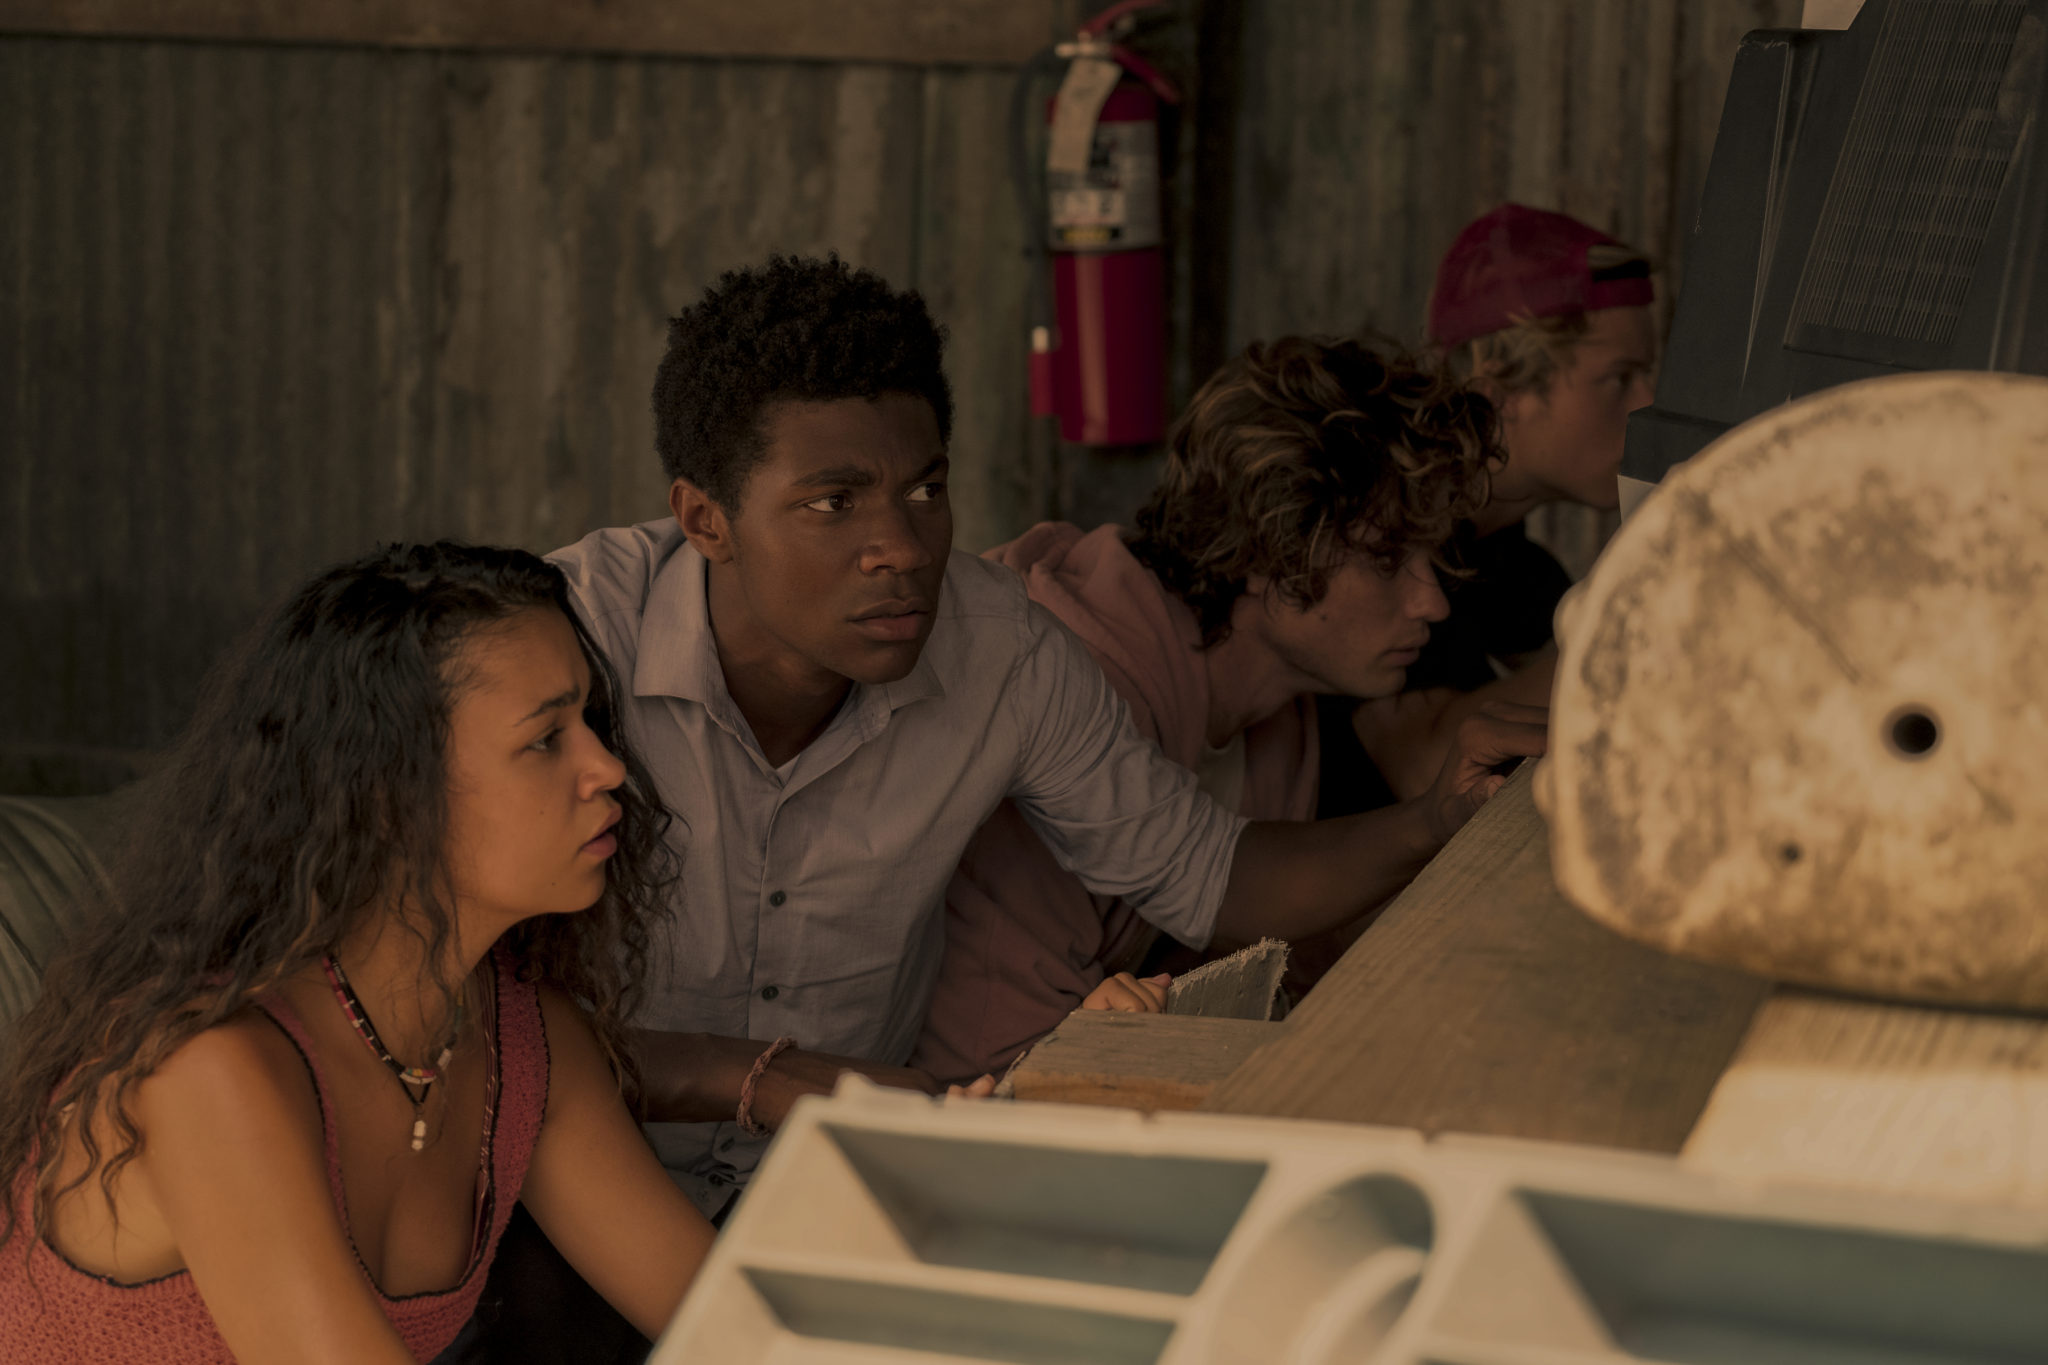 New Stills From Netflixs New Series “outer Banks” Released 8244